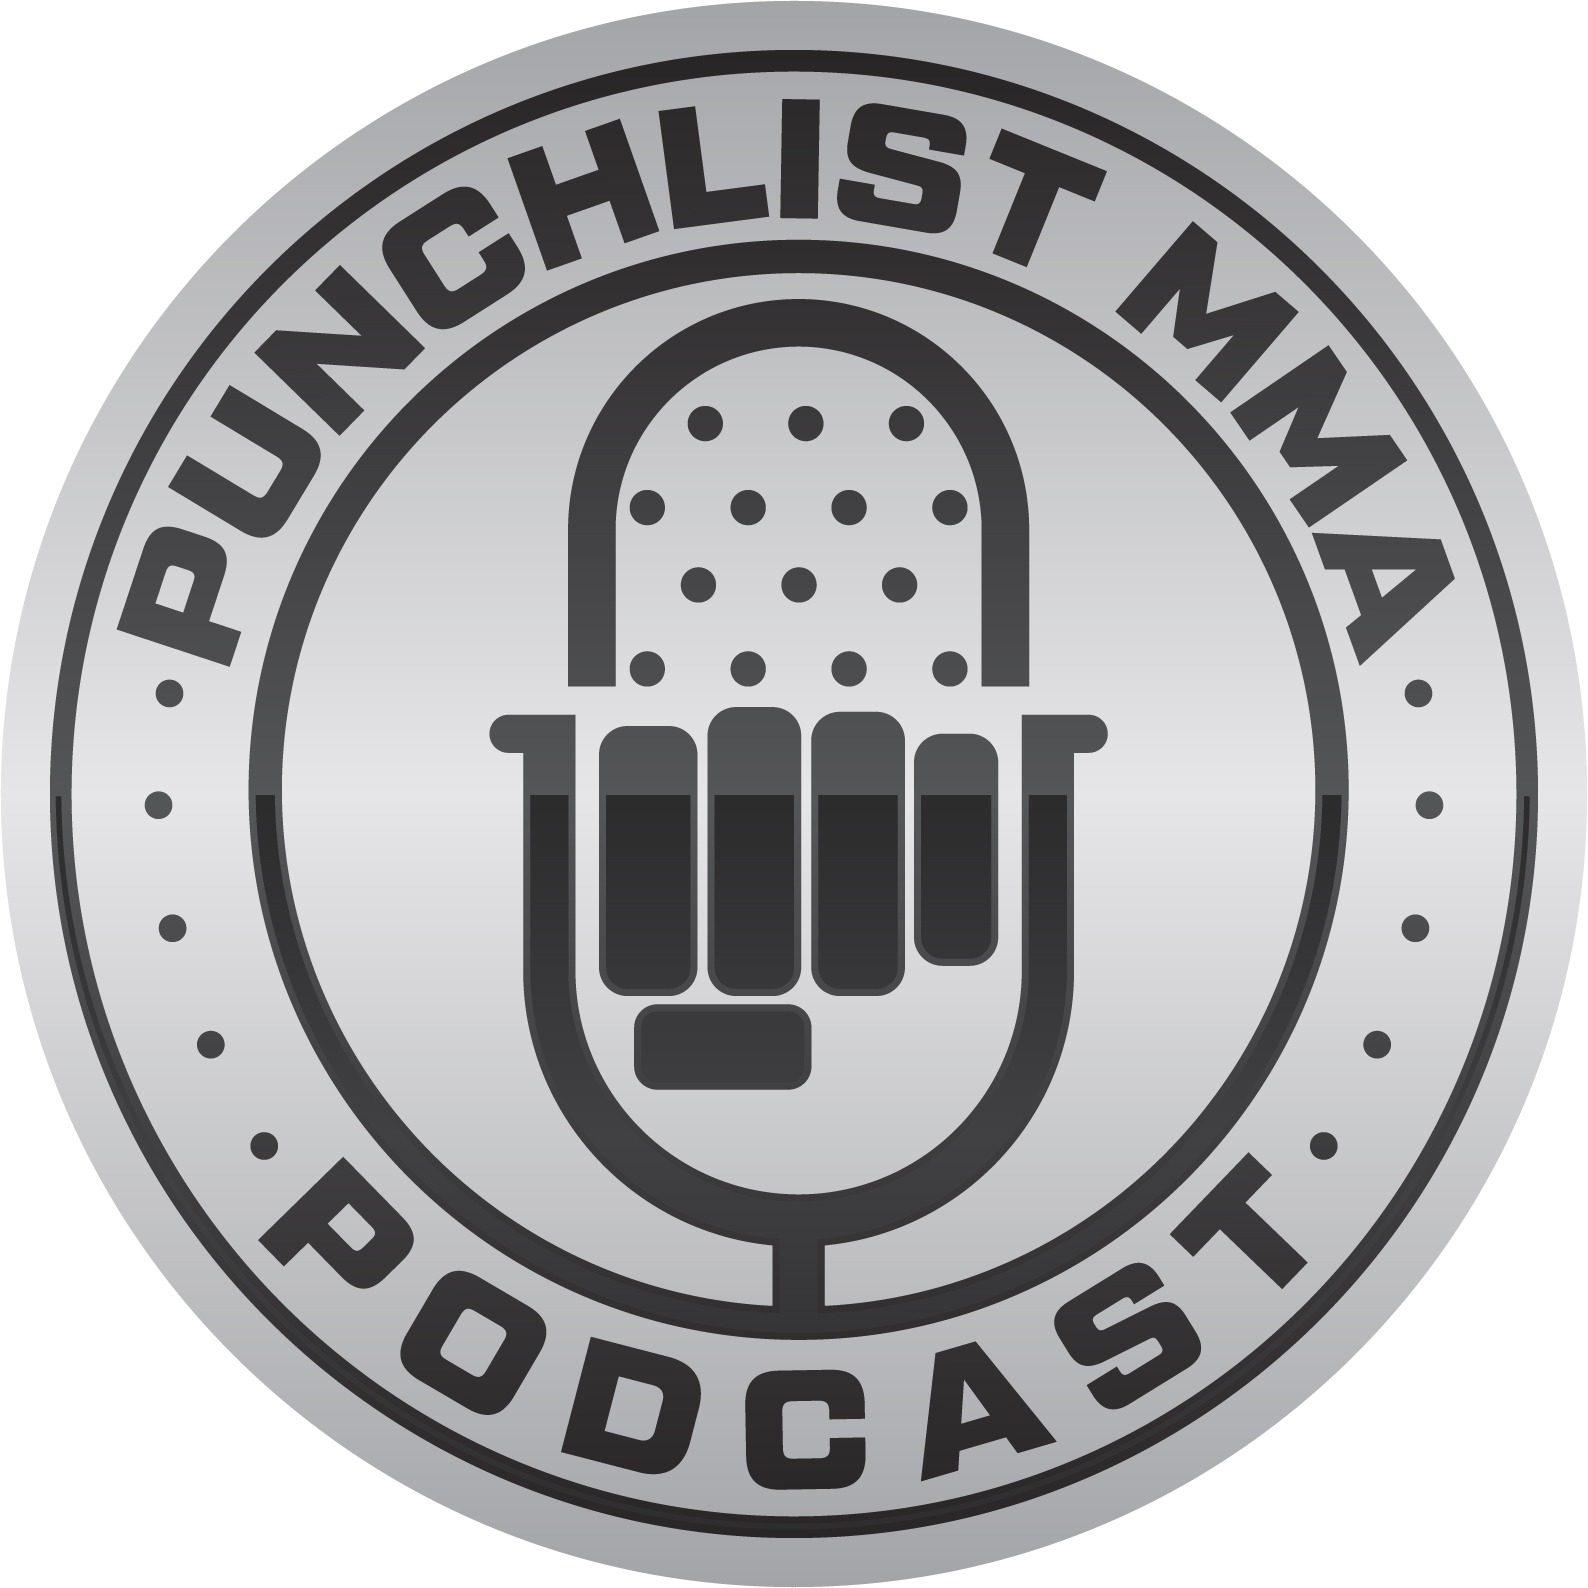 Punchlist MMA Official Betting Guide: UFC Vegas 51 LUQUE vs MUHAMMAD